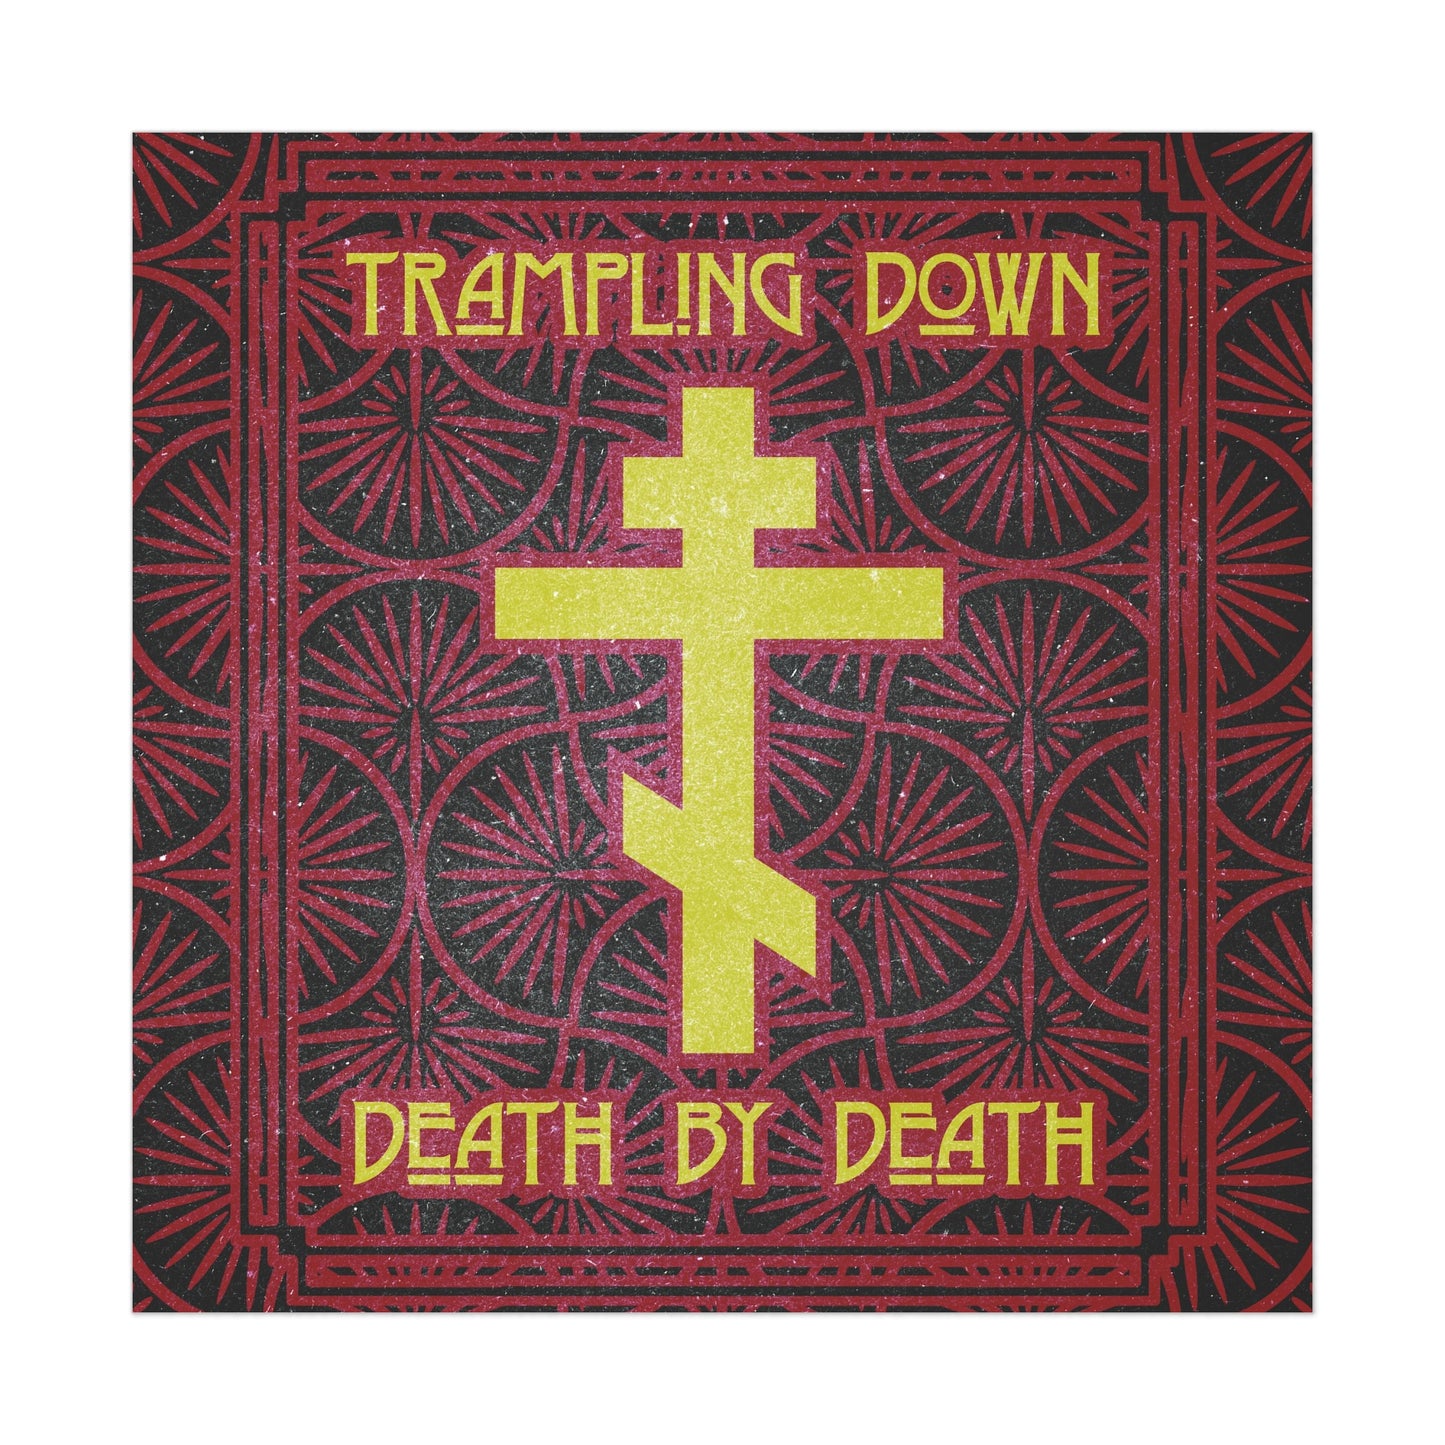 Trampling Down Death by Death No. 2 | Orthodox Christian Art Poster